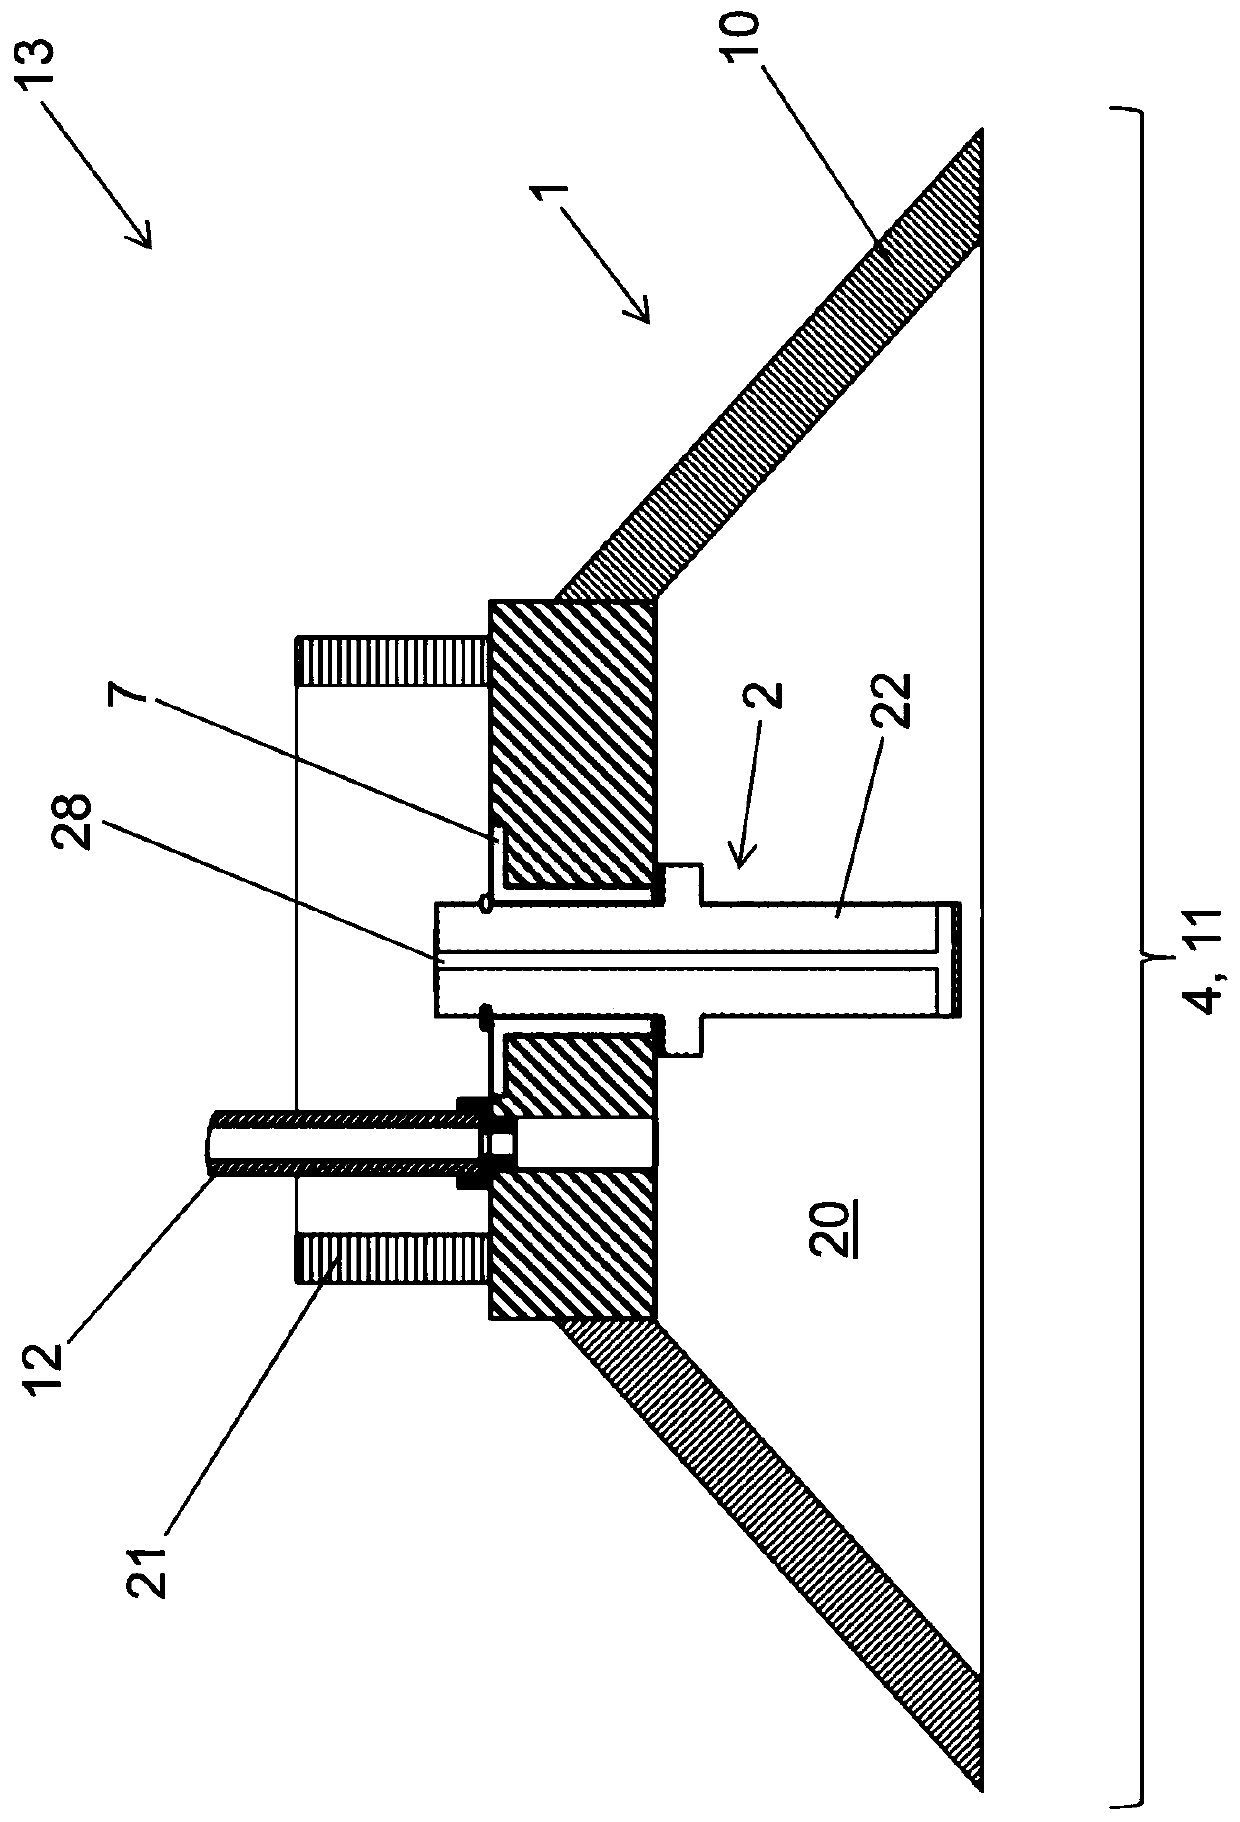 Apparatus for handling and locally fixing flat thermoplastic materials